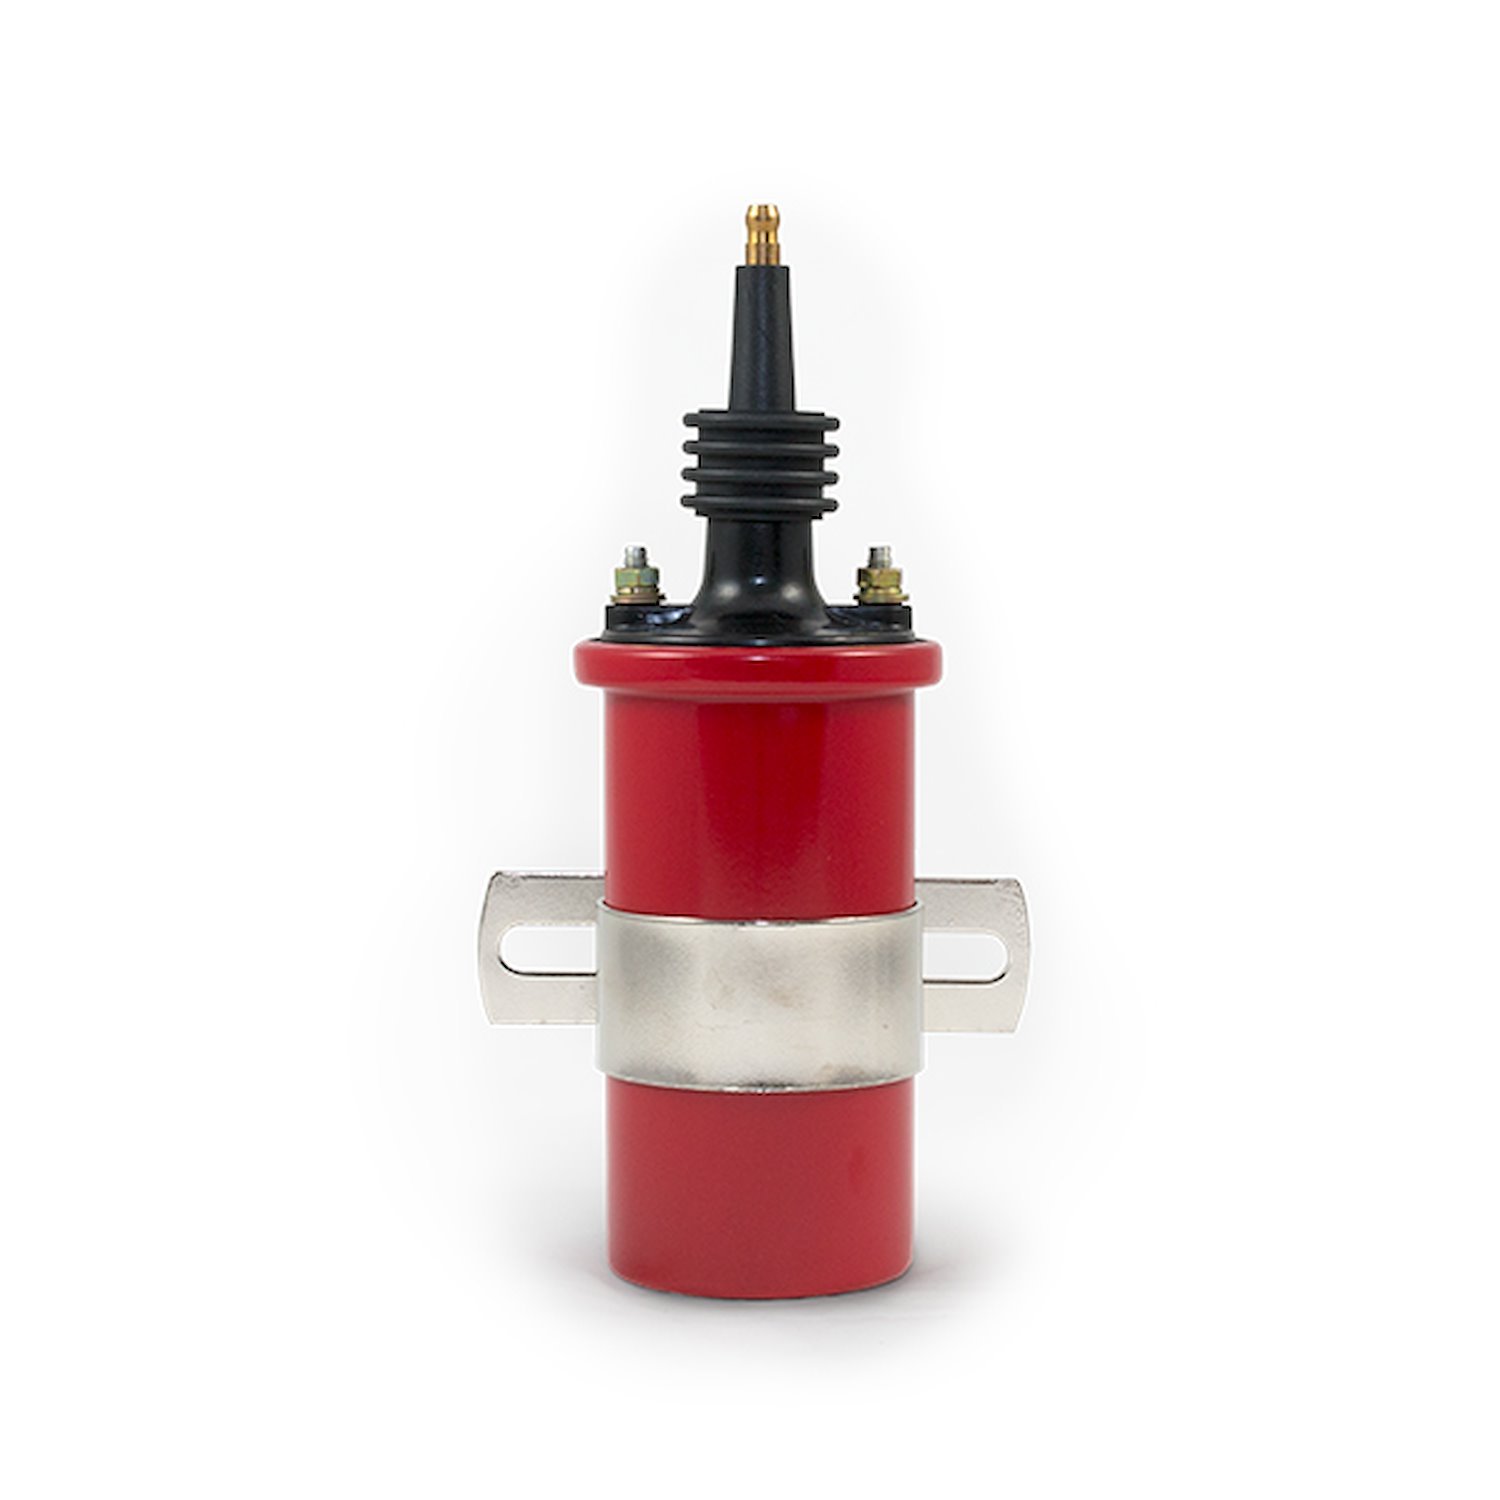 JM6928R Ignition Coil, Oil-Filled Canister Style, Male Socket, Red